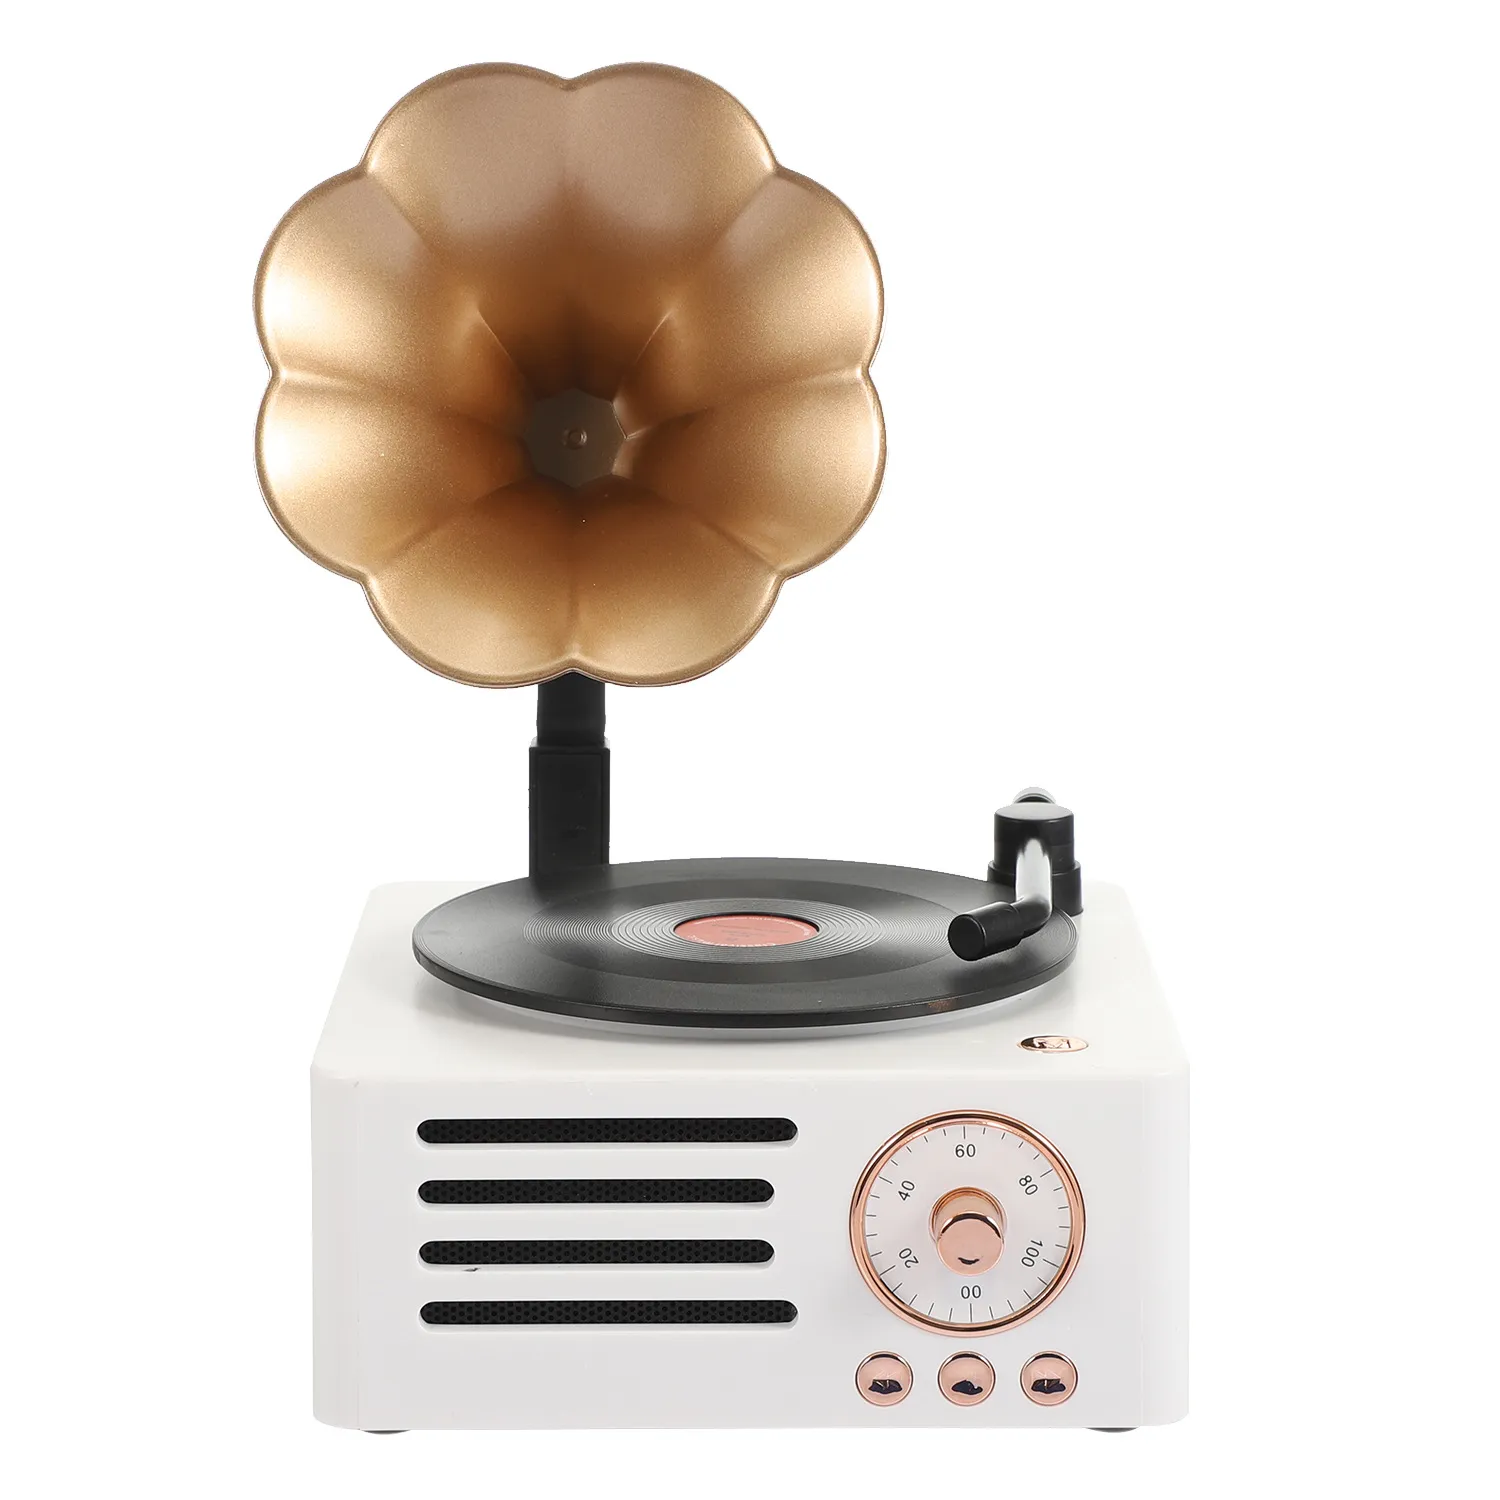 Bluetooth speaker Record Player Retro Turntable All in One Vintage Phonograph Nostalgic Gramophone Built-in Speaker 3.5mm Aux-in/USB